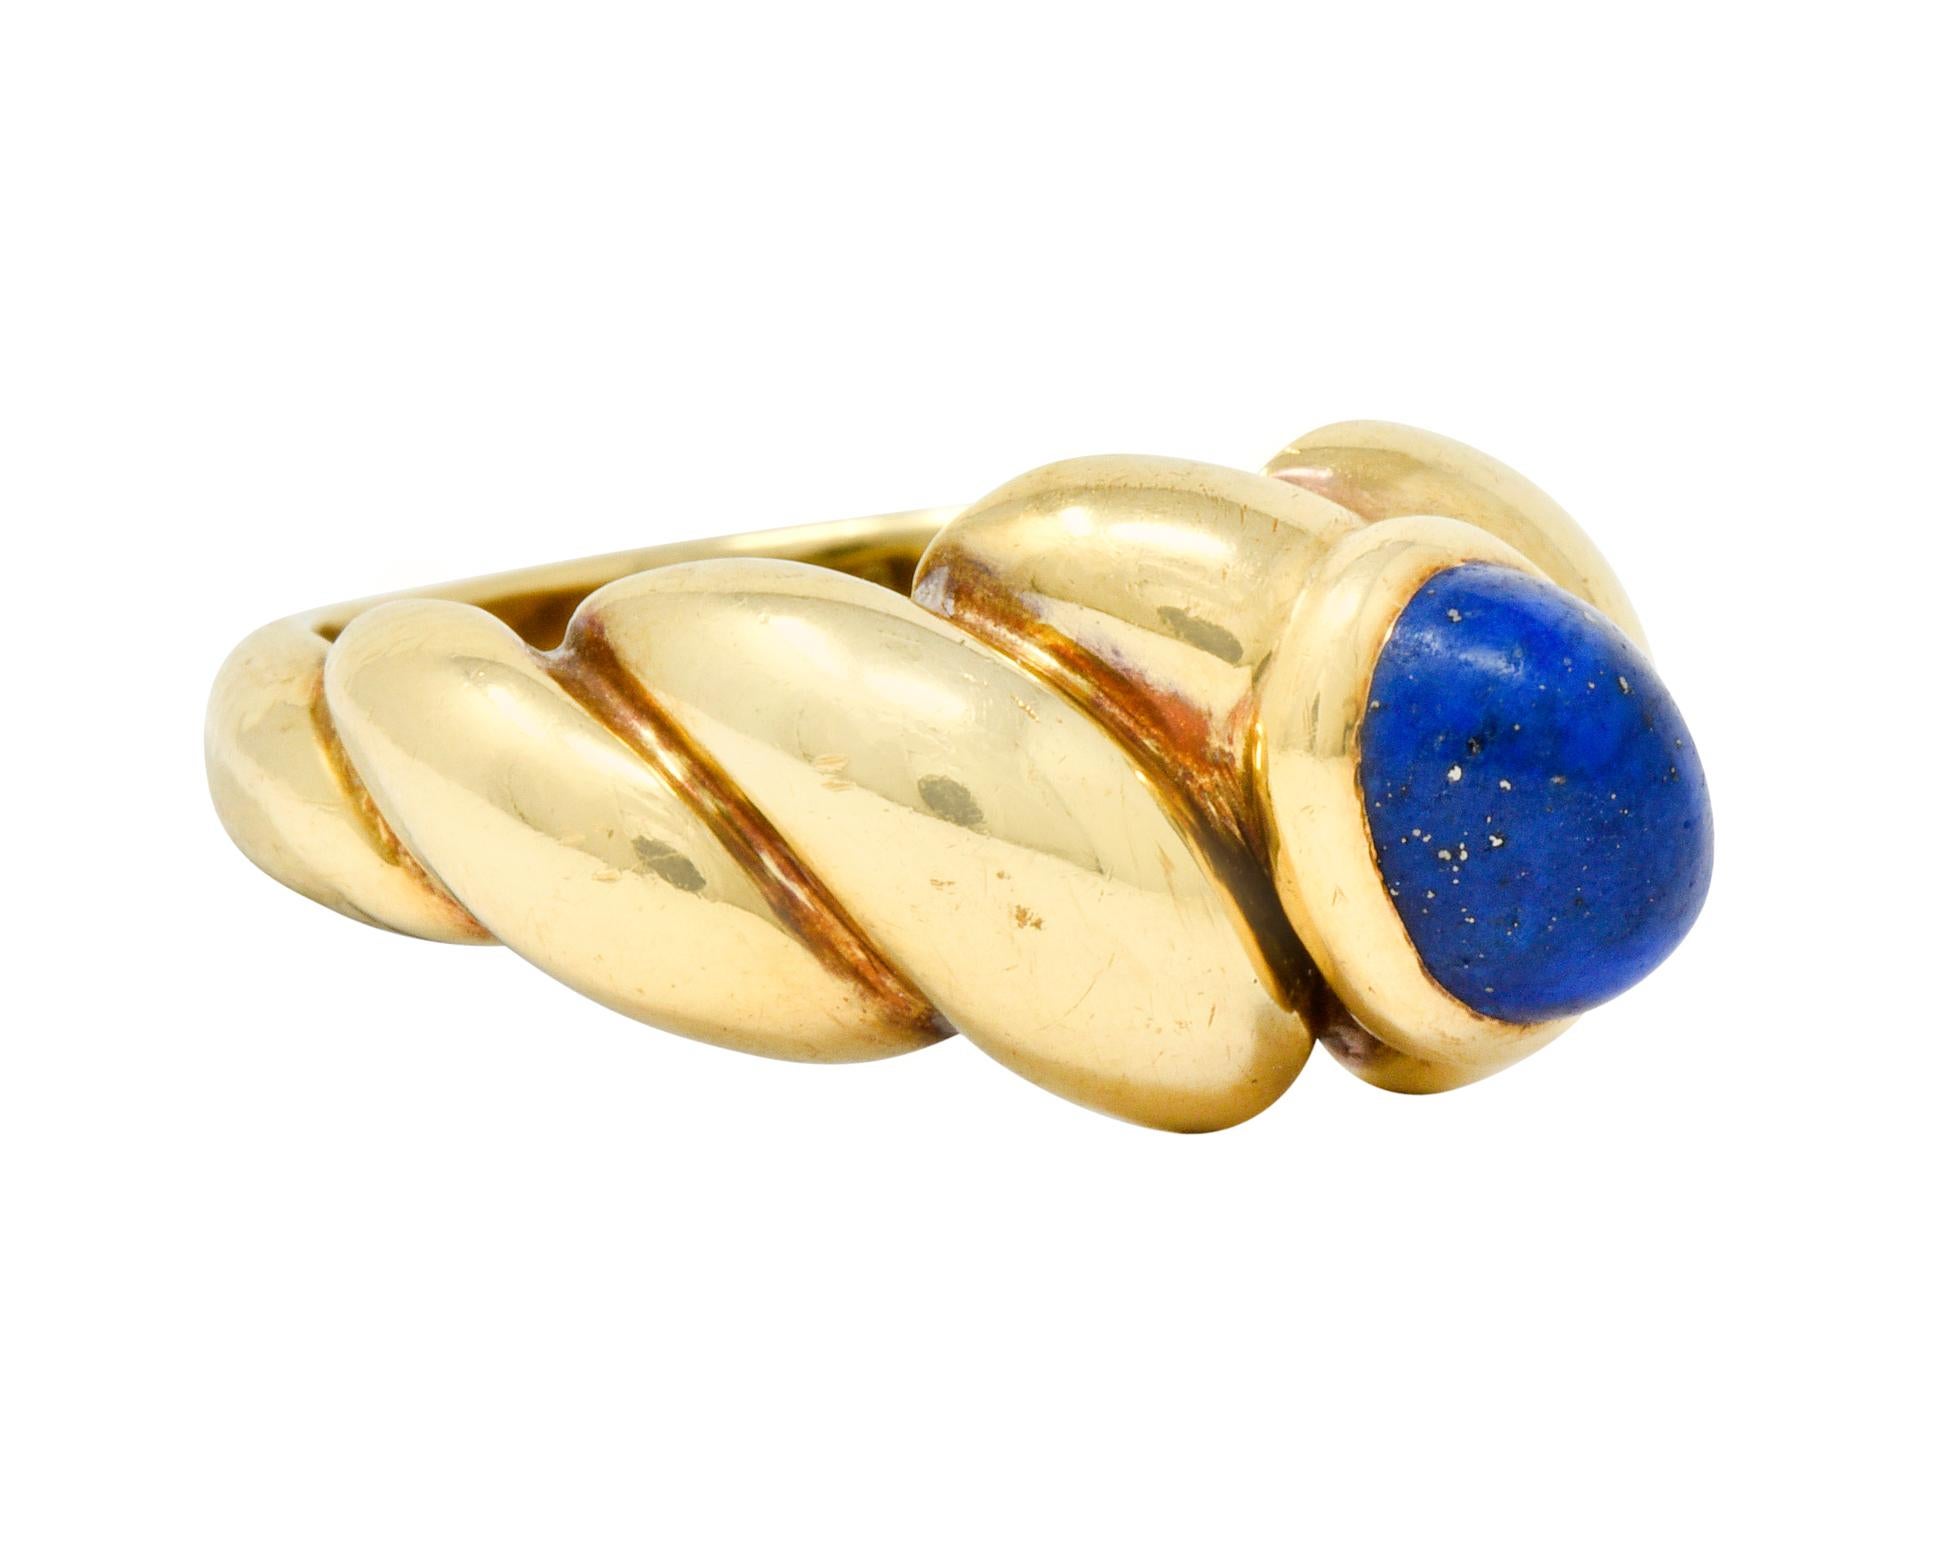 Centering a bezel set oval lapis cabochon measuring approximately 7.3 x 5.4 mm, ultramarine blue in color with flecks of gold pyrite

Completed by a dynamically twisted band with a polished gold finish

Maker's mark for Van Cleef & Arpels and